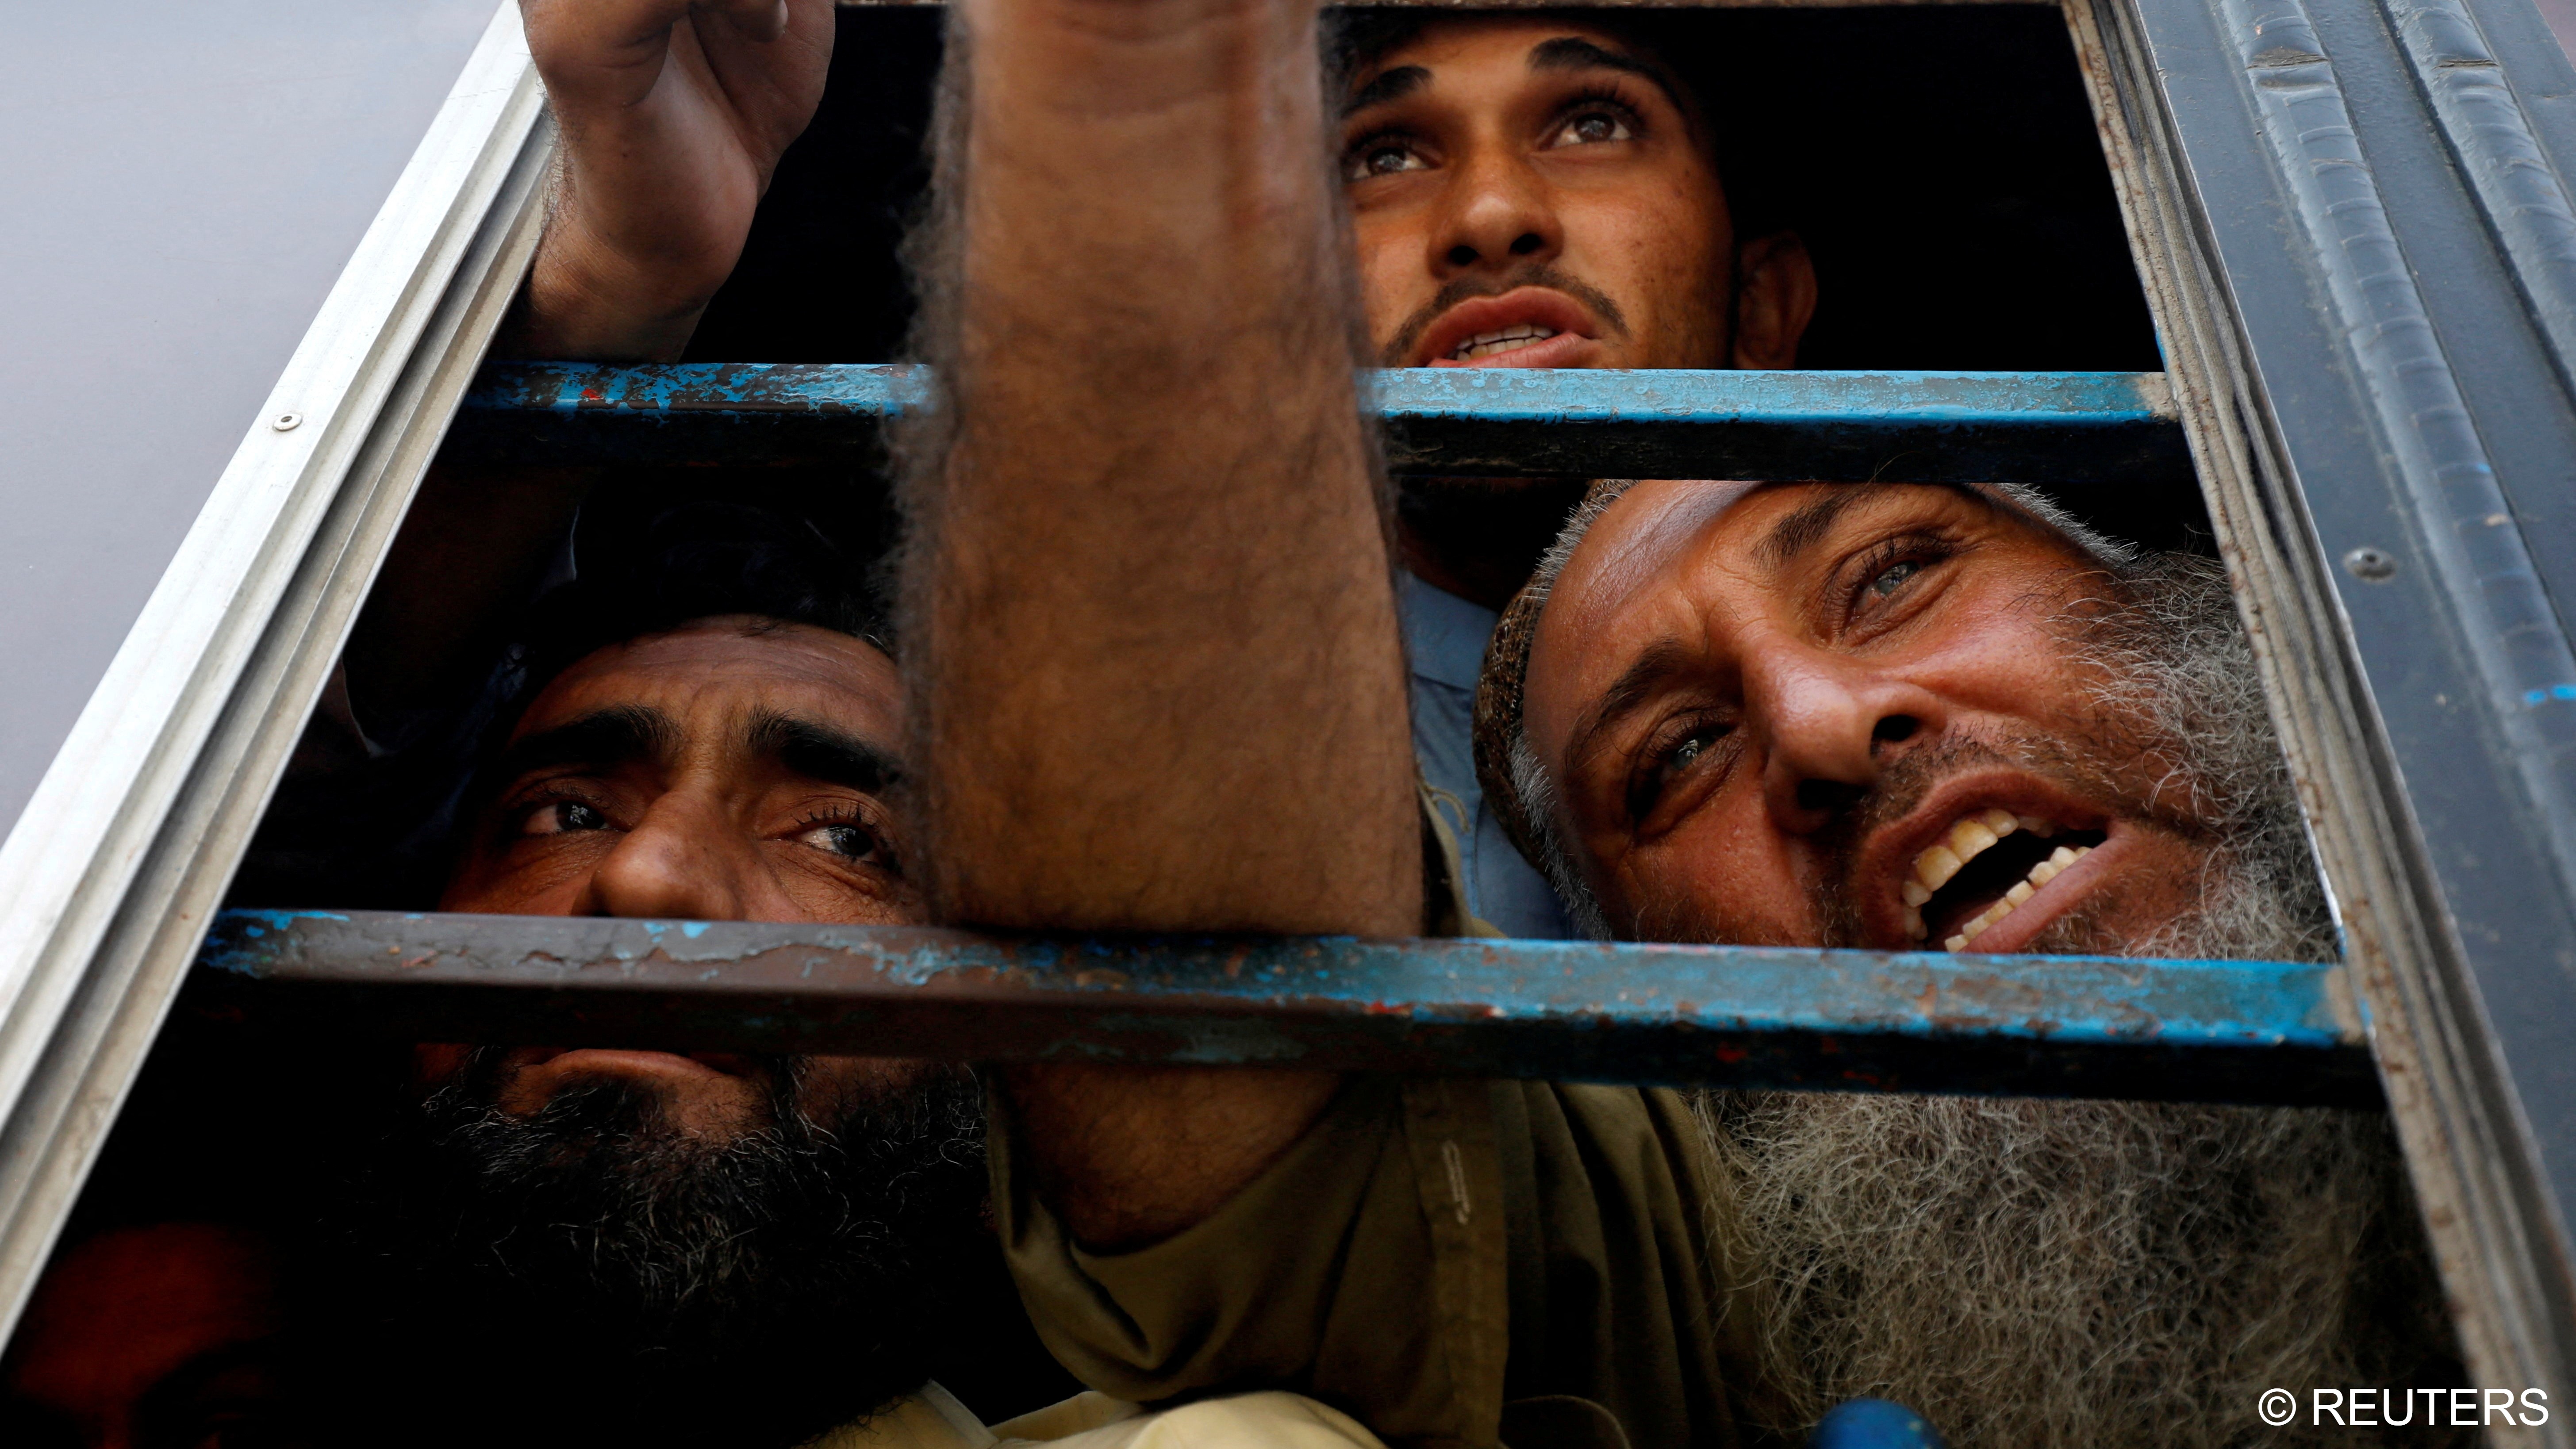 Afghan nationals, who according to police were undocumented, reach out though the window of a police bus and speak to members of the media, as they were detained and brought to a temporary holding centre, Karachi, Pakistan, 2 November 2023